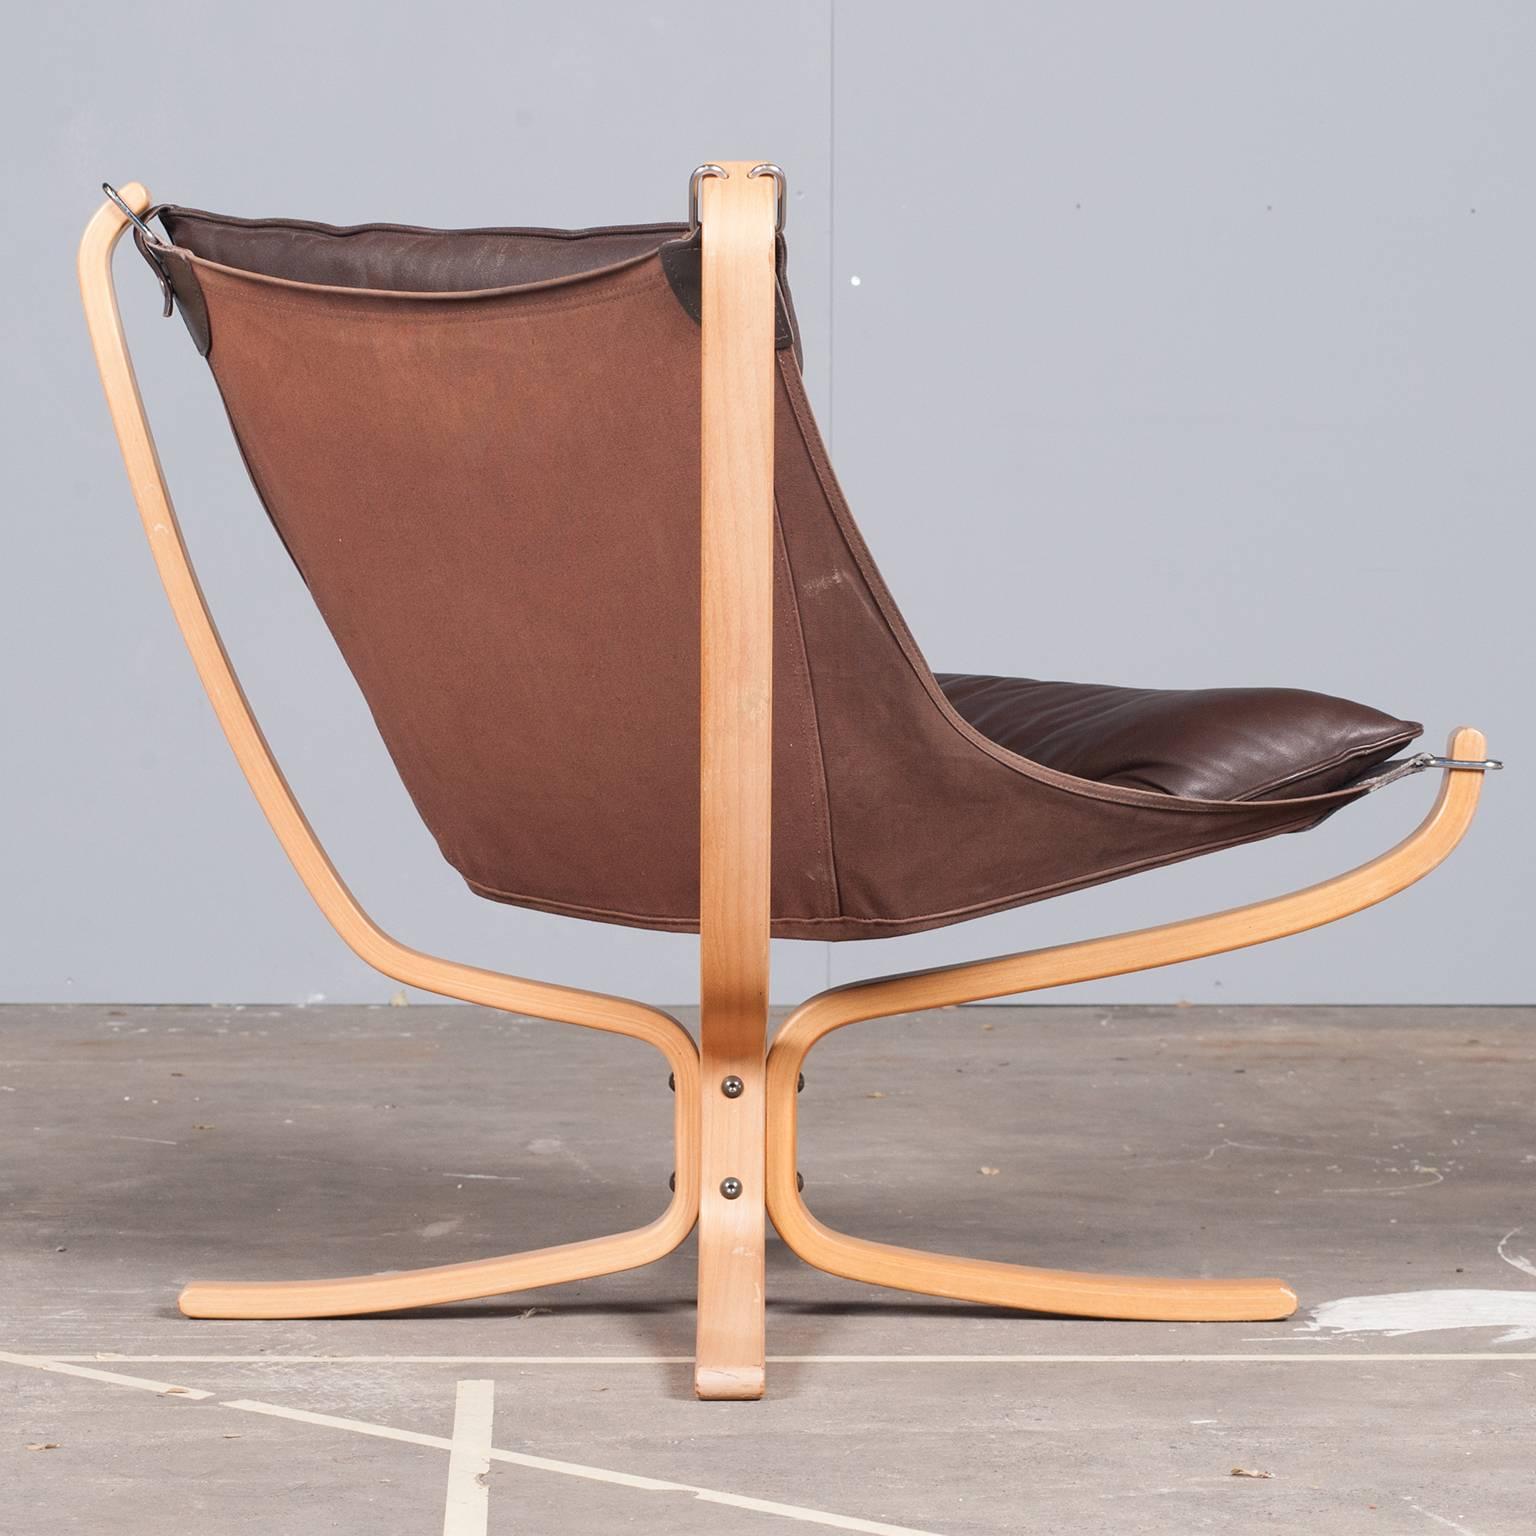 Norwegian Falcon Chair in Chocolate Brown Leather by Sigurd Ressel, 1971 In Excellent Condition For Sale In Melbourne, Victoria